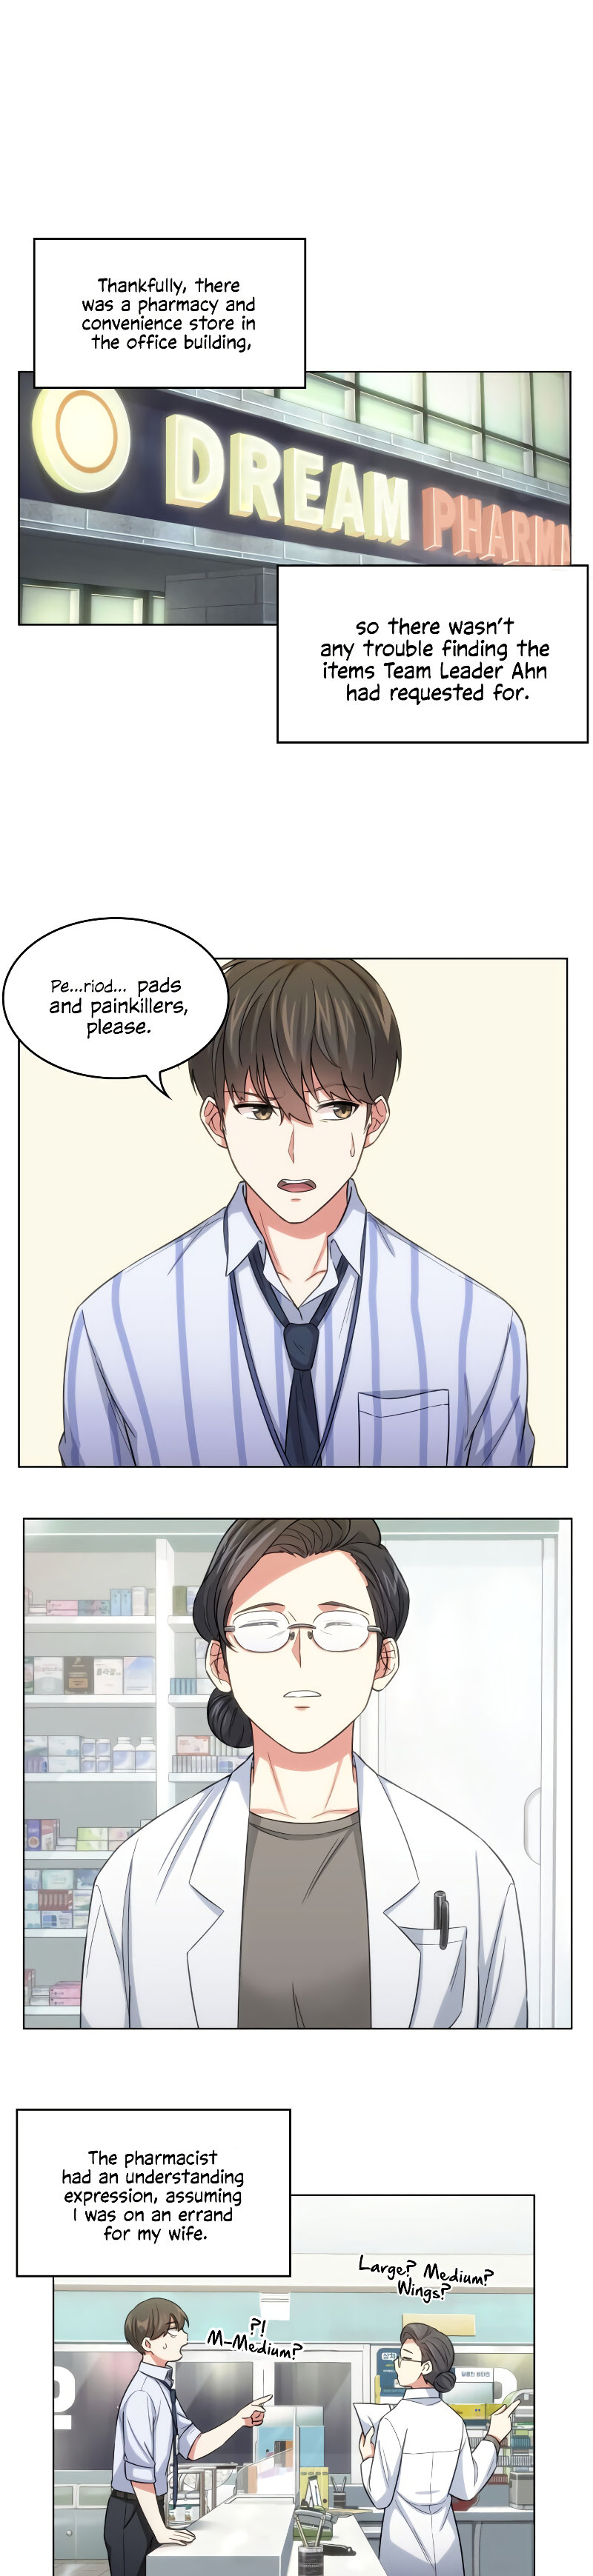 My Office Noona’s Story - Chapter 8 Page 5